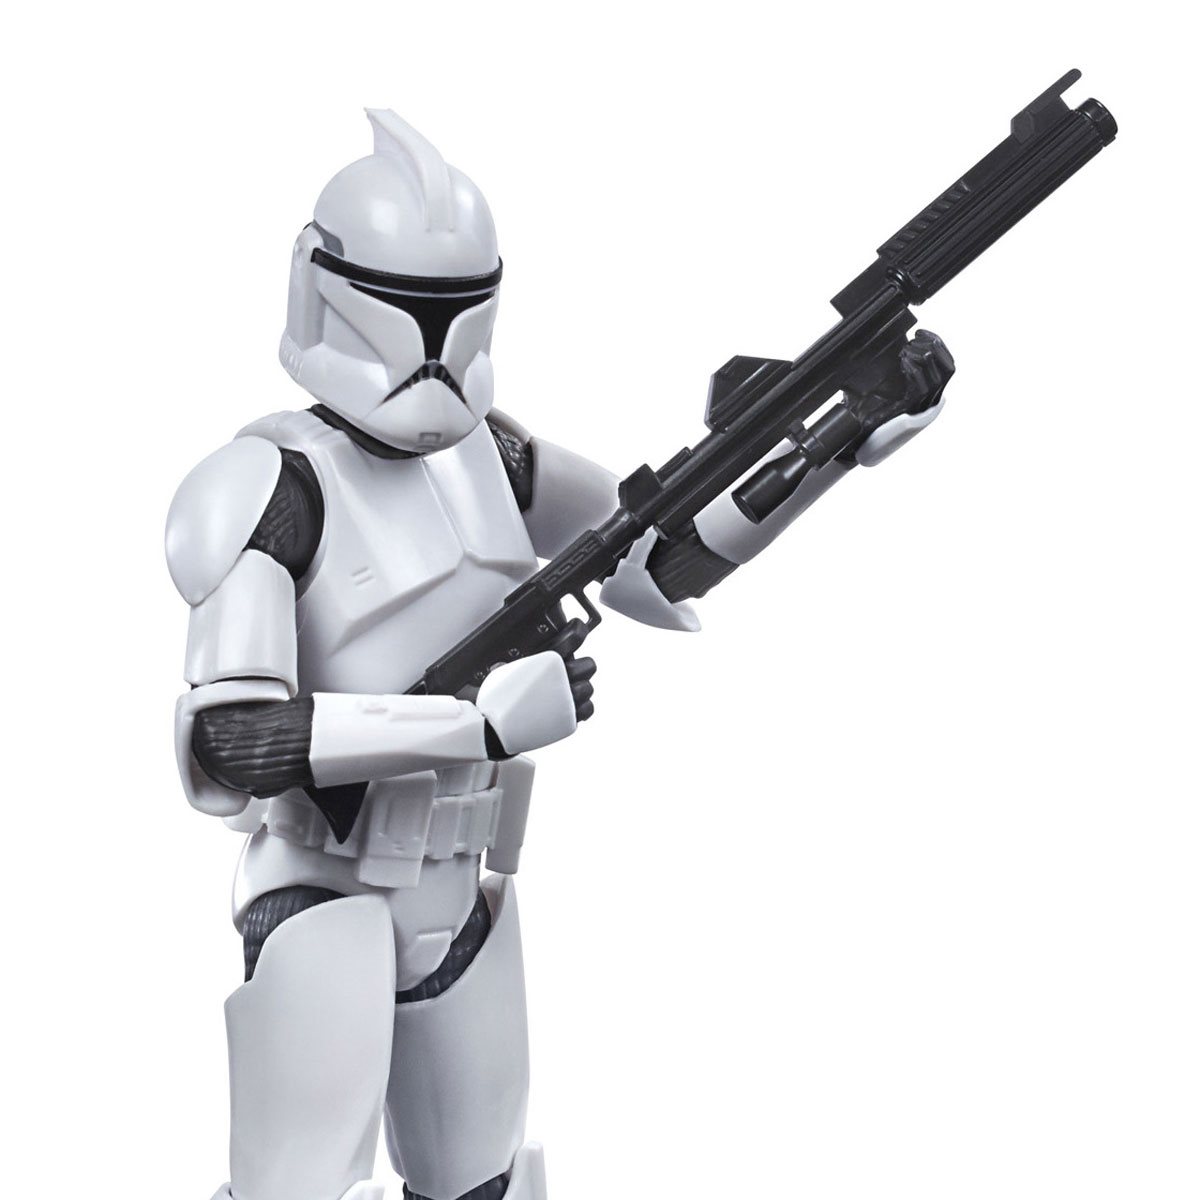 Star Wars Black Series 6" Action Figure new,but without box clone trooper A60K 